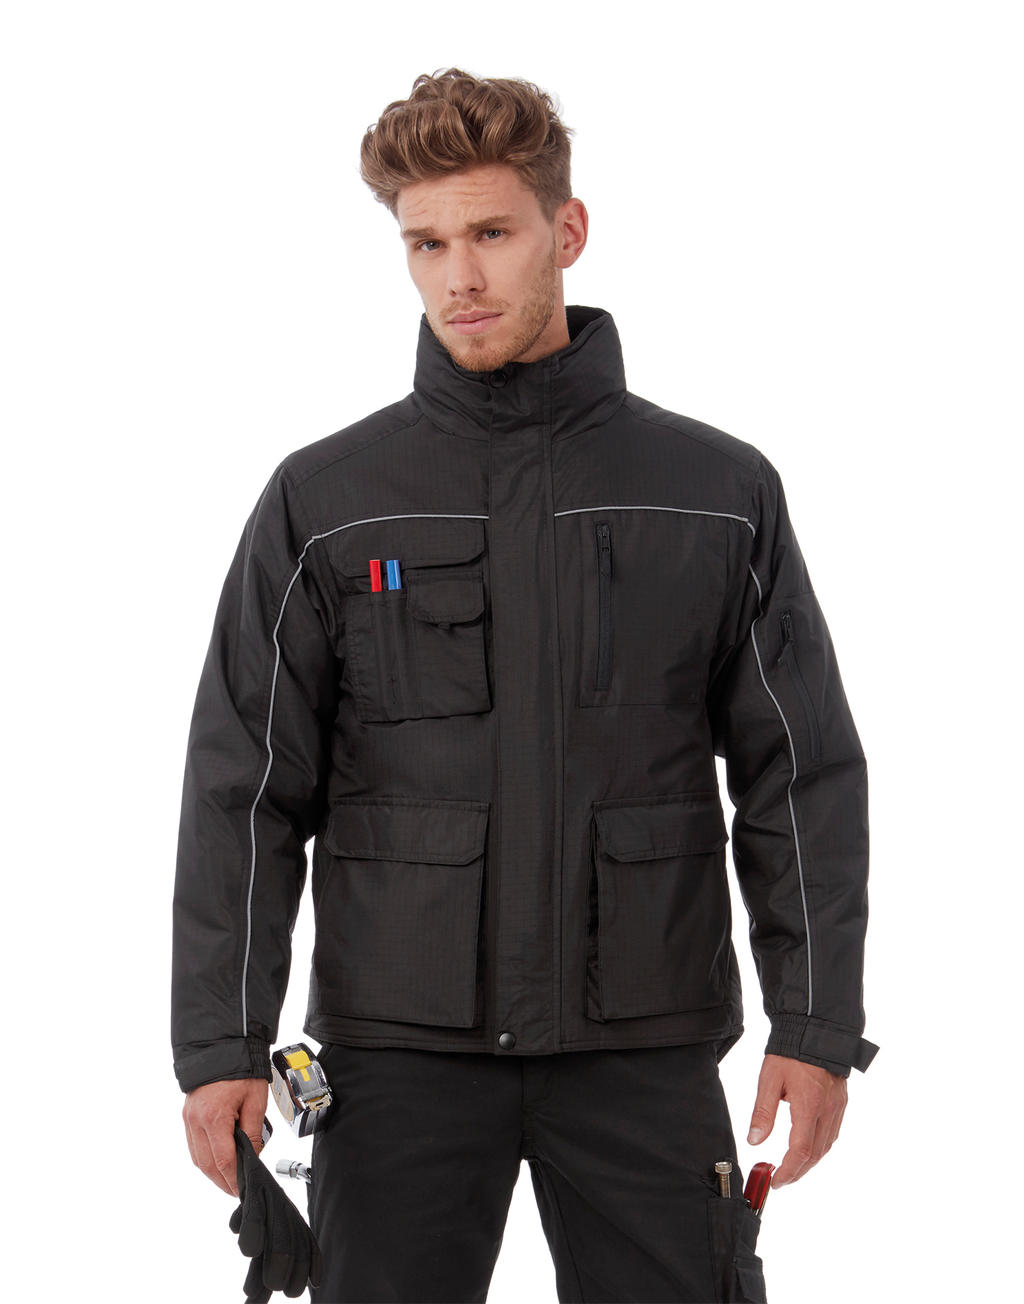  Shelter PRO Jacket in Farbe Black